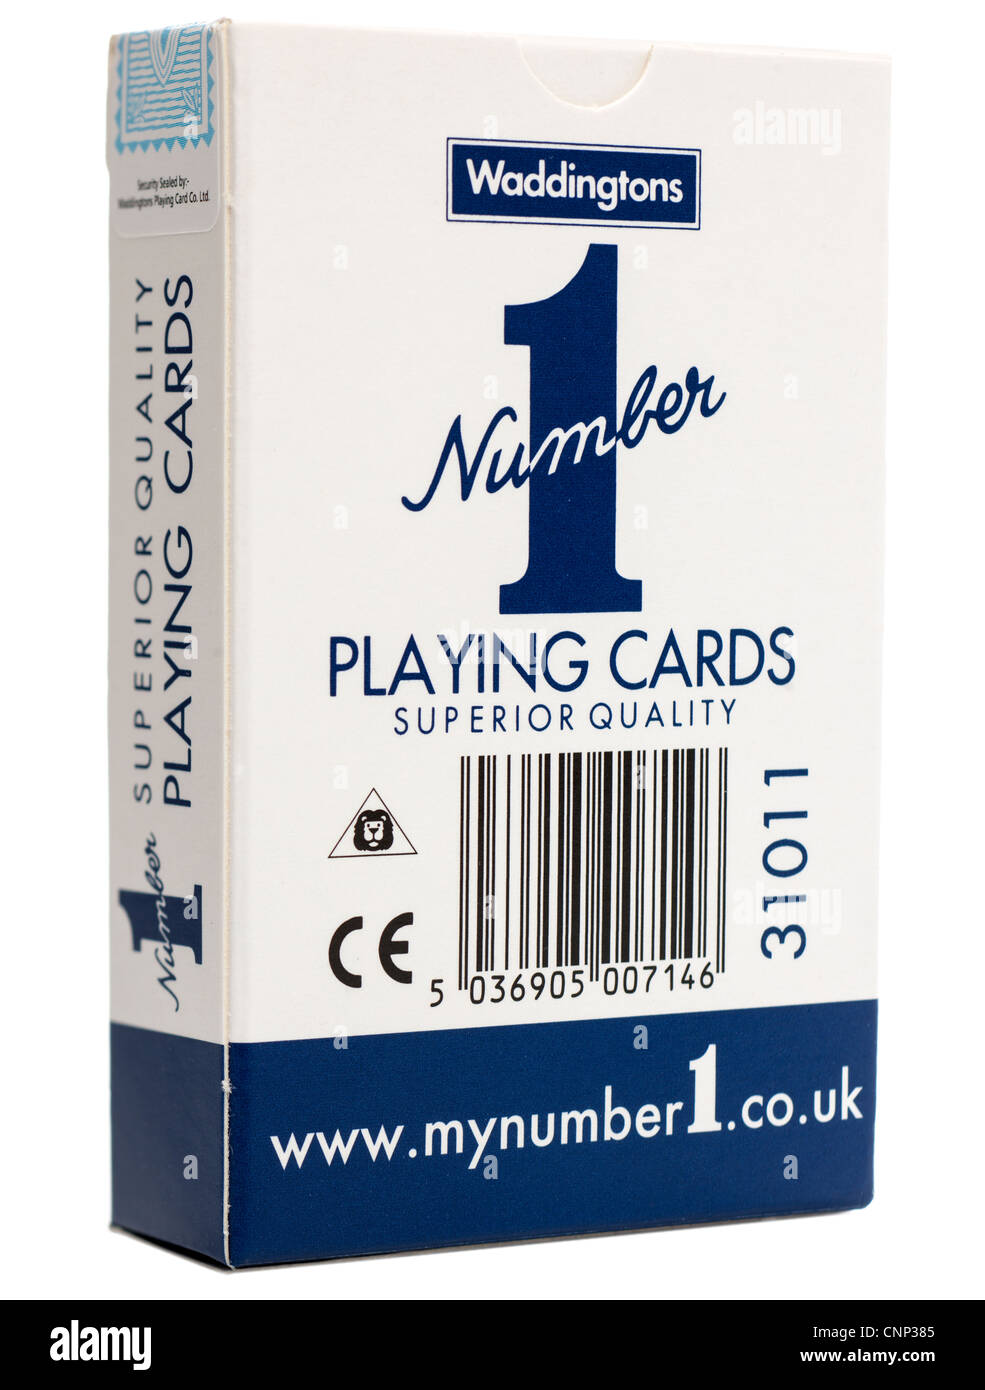 Sealed pack of Waddington number one playing cards Stock Photo